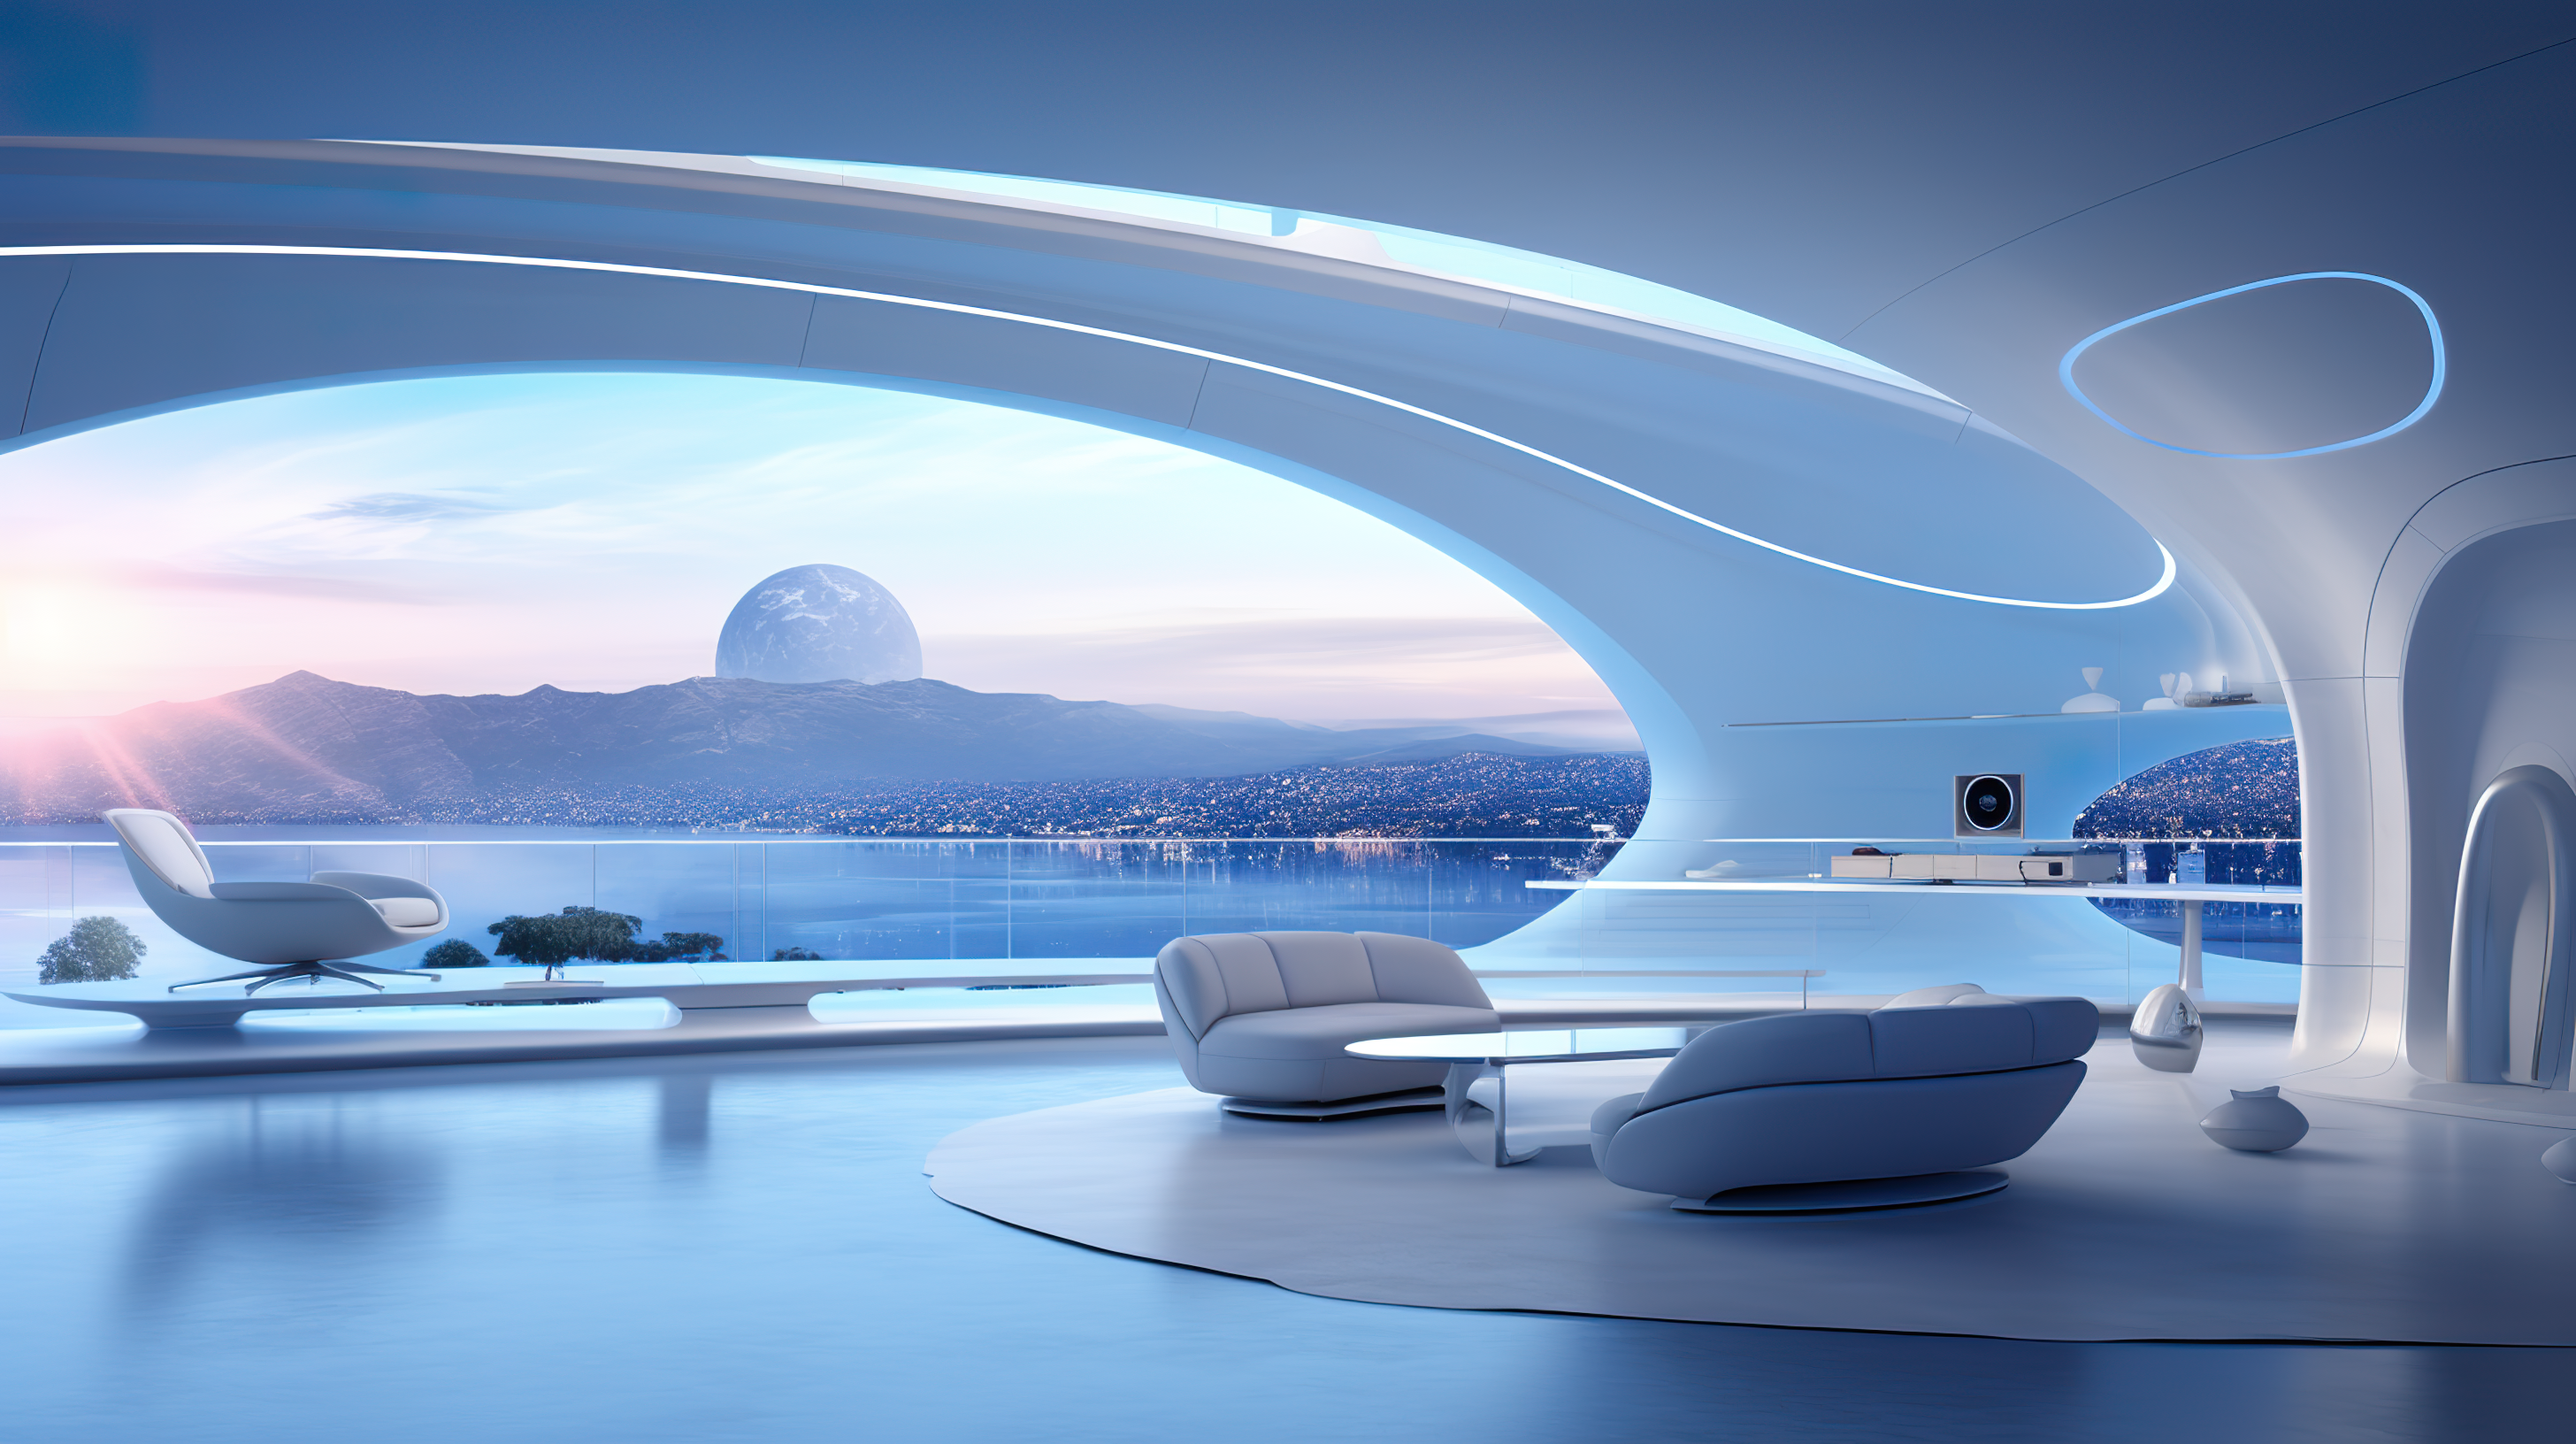 11 Awesome Futuristic Rooms You Will Love